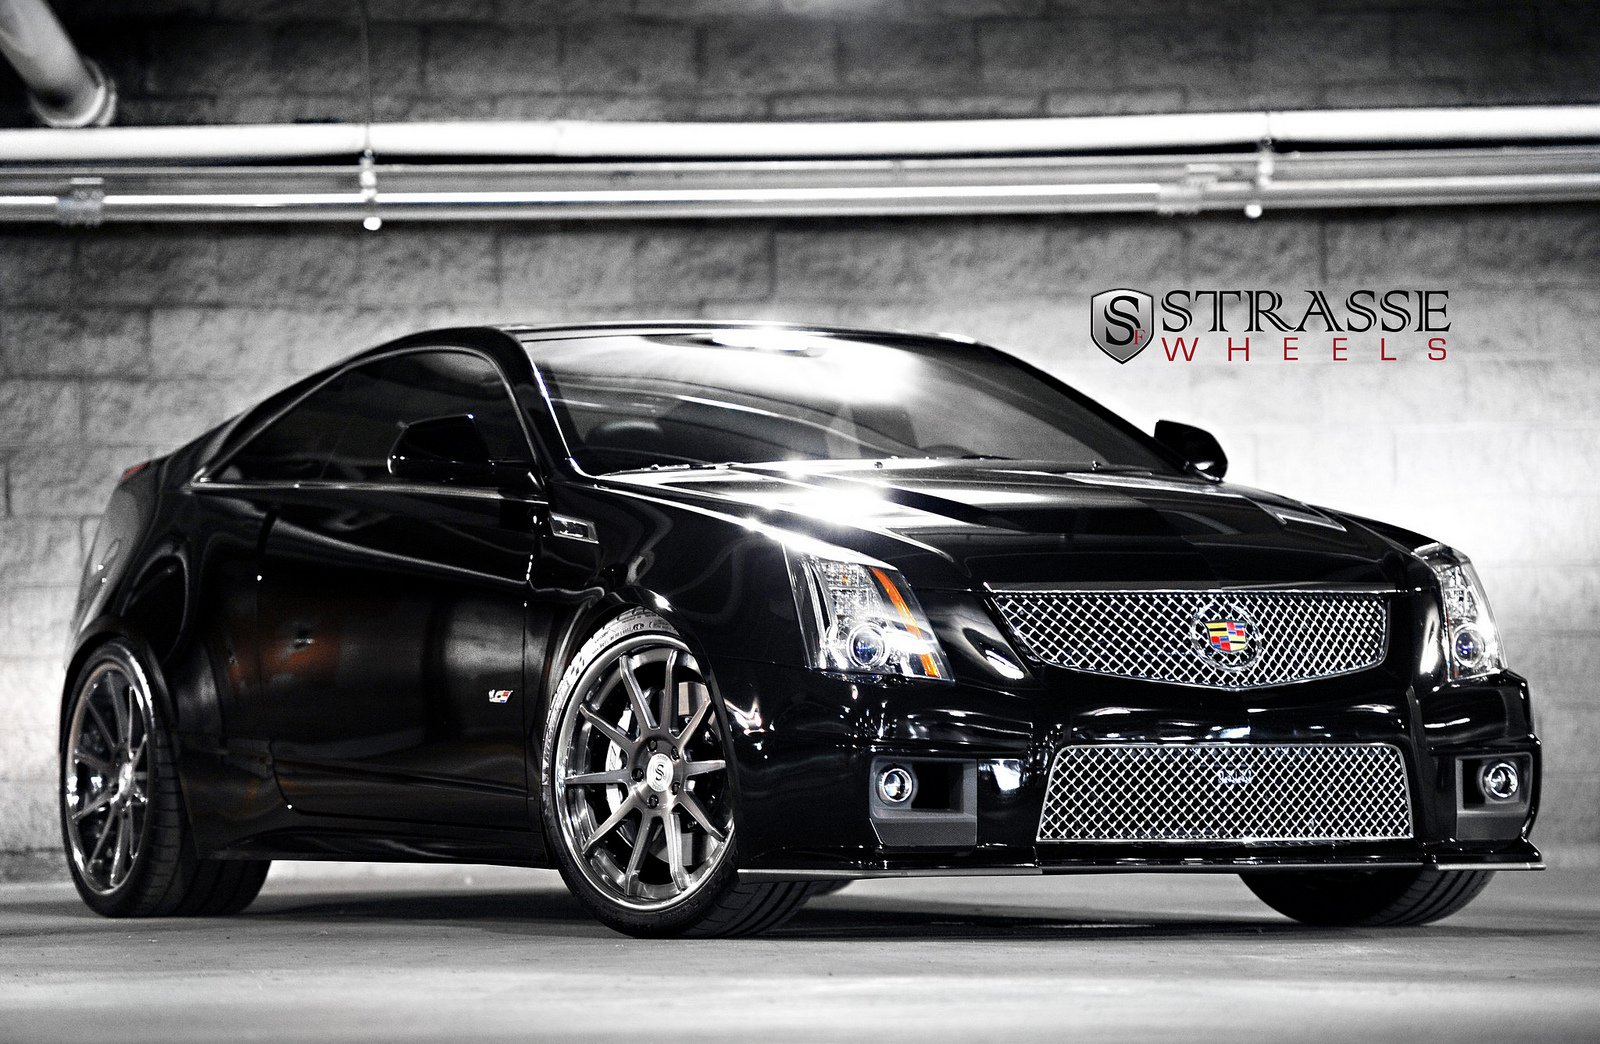 cadillac, Cars, Coupe, Cts, V, Strasse, Tuning, Wheels, Black Wallpaper